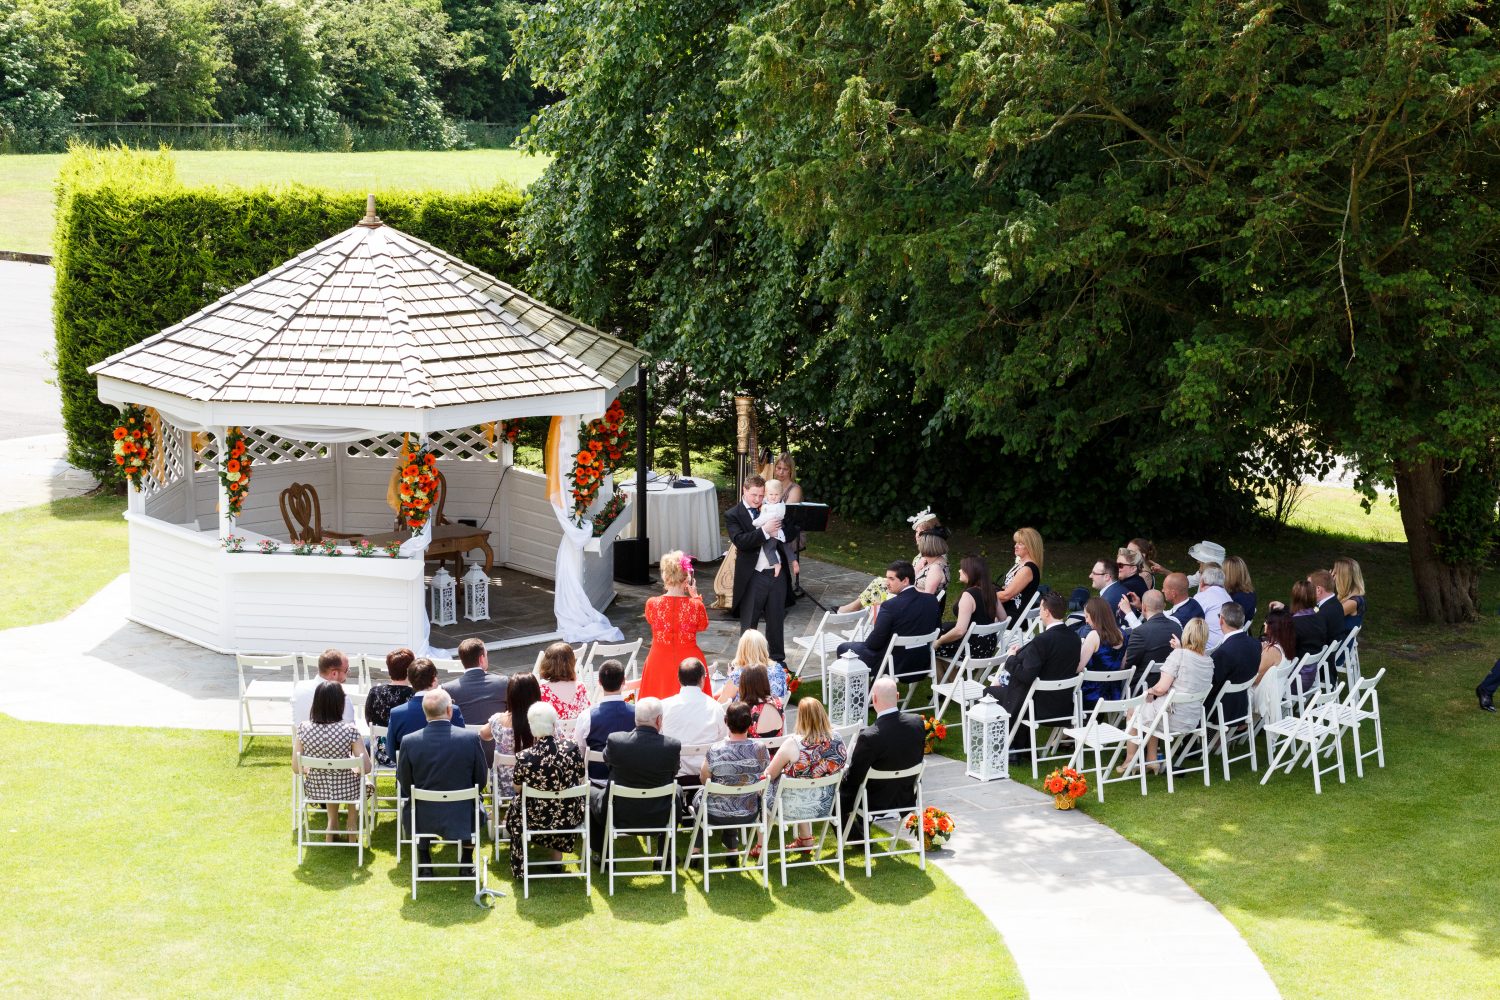 Groom & wedding guests waiting for the bride to arrive at the wedding pagoda in the garden at West Towerony in the